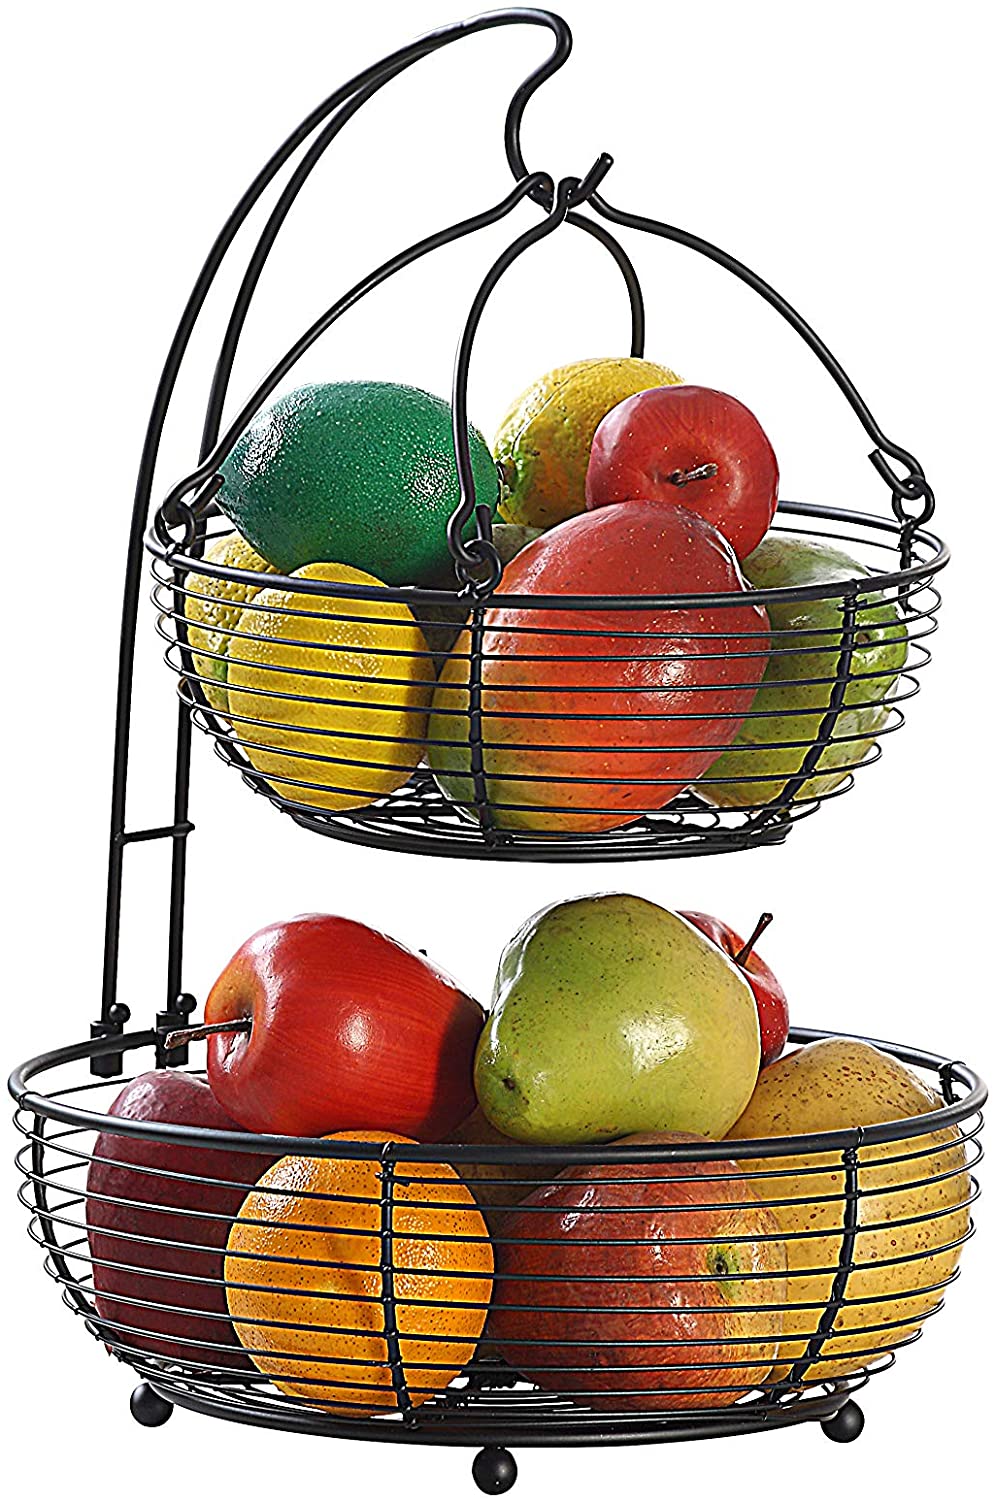 Sunnypoint Black Multifunction 2-tier Basket With Banana Hook